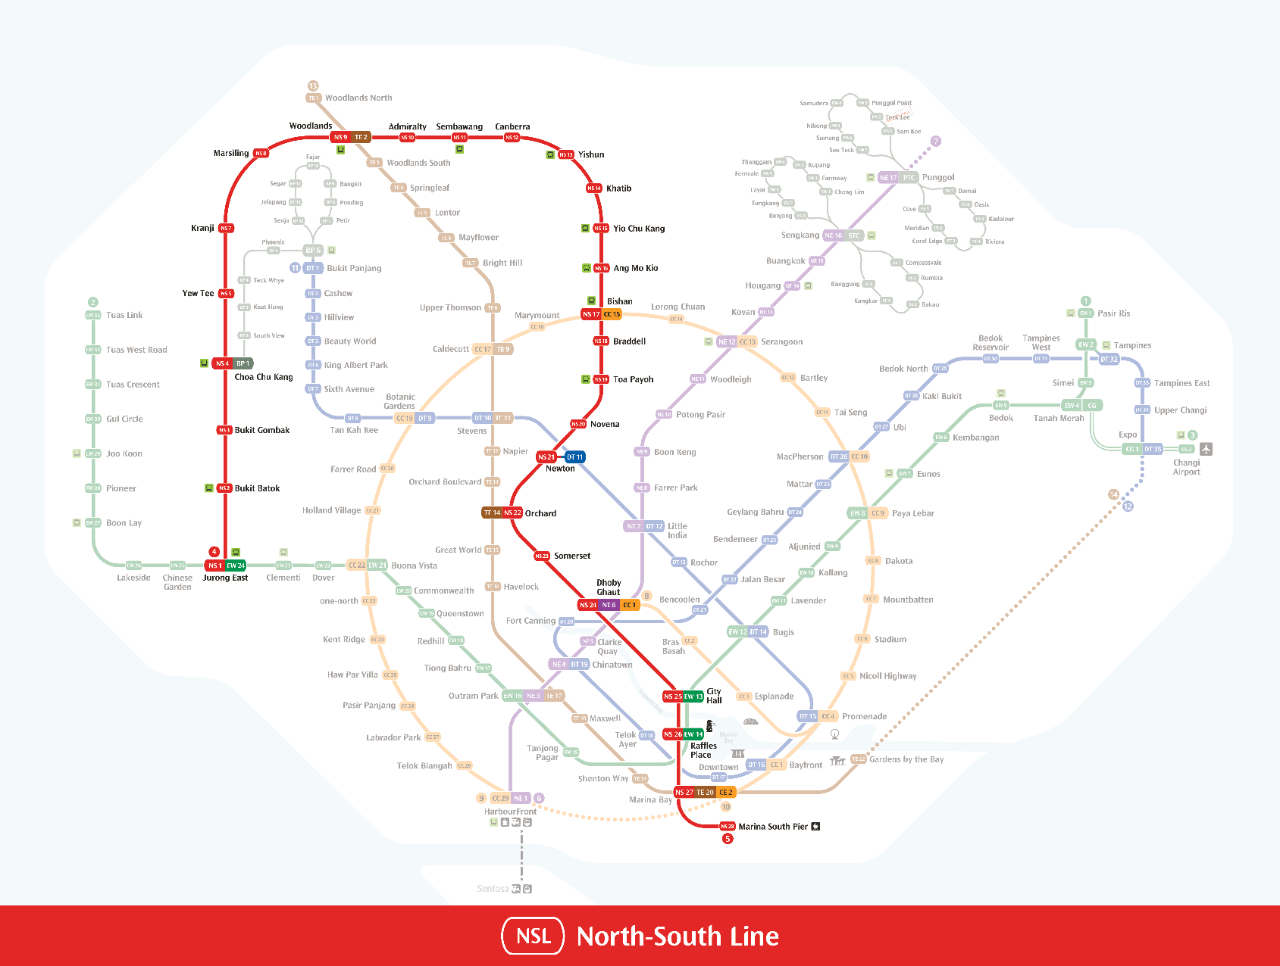 This is the system map for North-South Line.